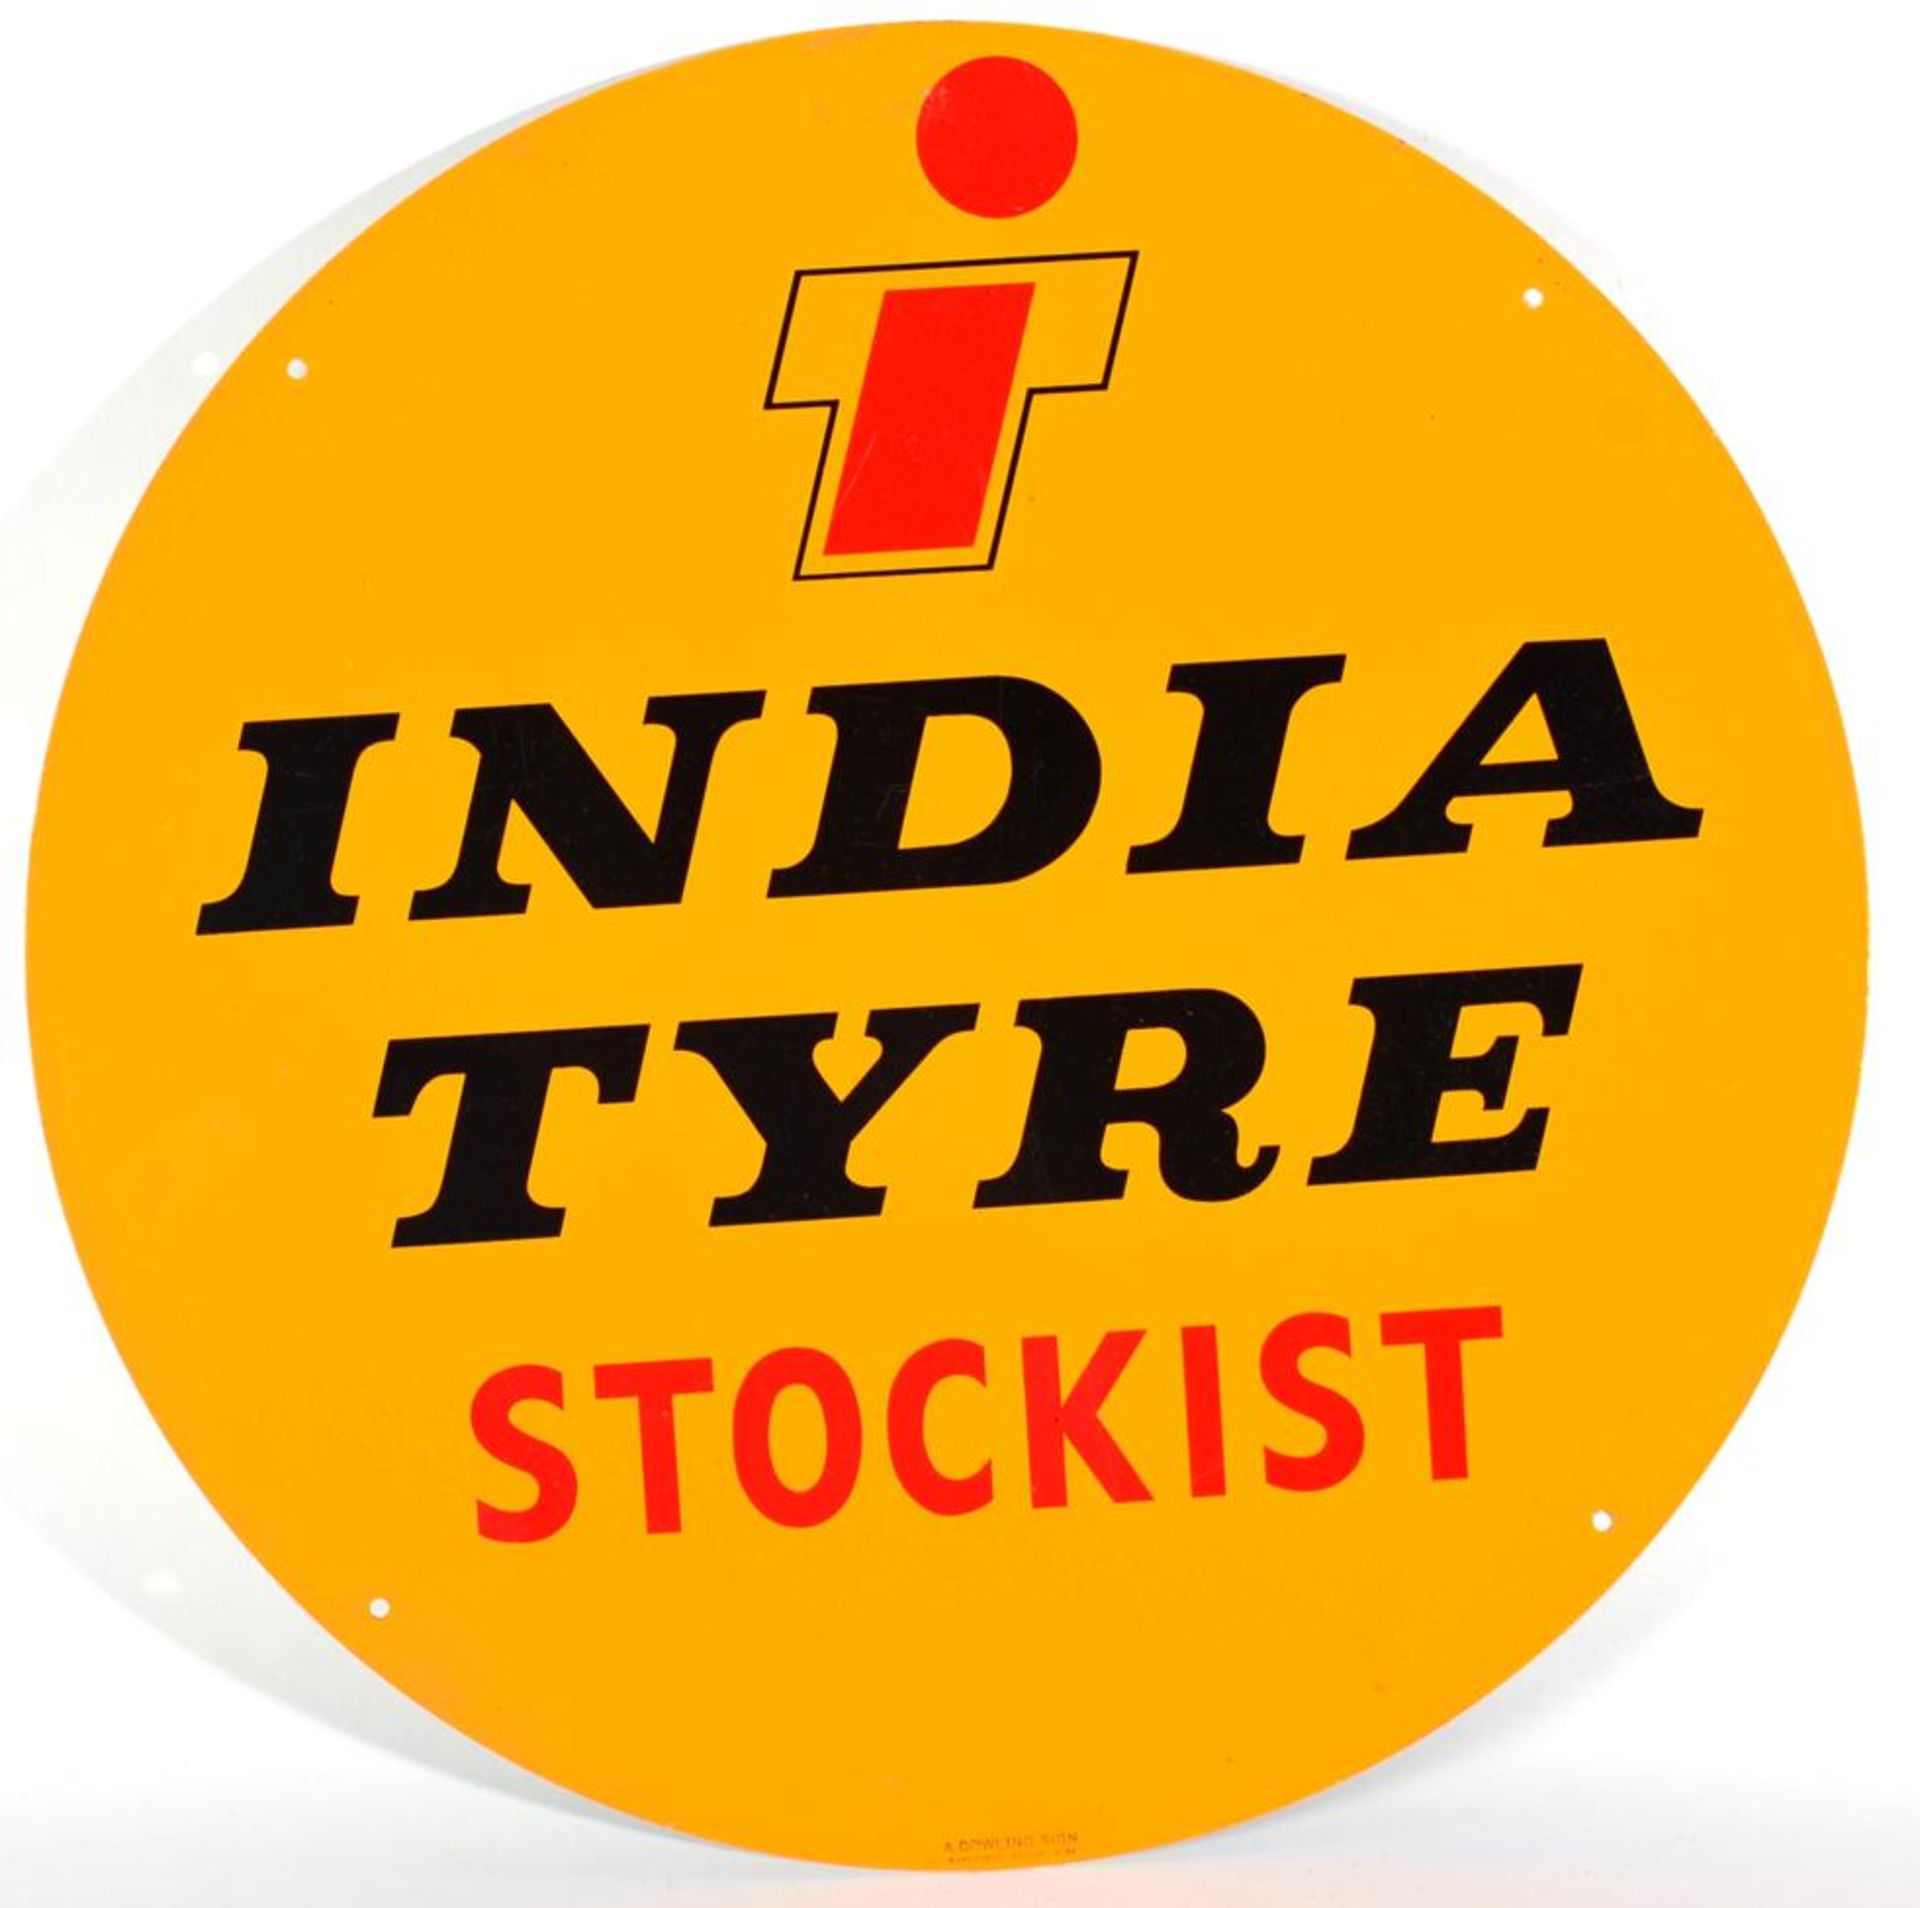 A Single-Sided Circular Metal Advertising Sign: INDIA TYRE STOCKIST, with four drill holes, the base